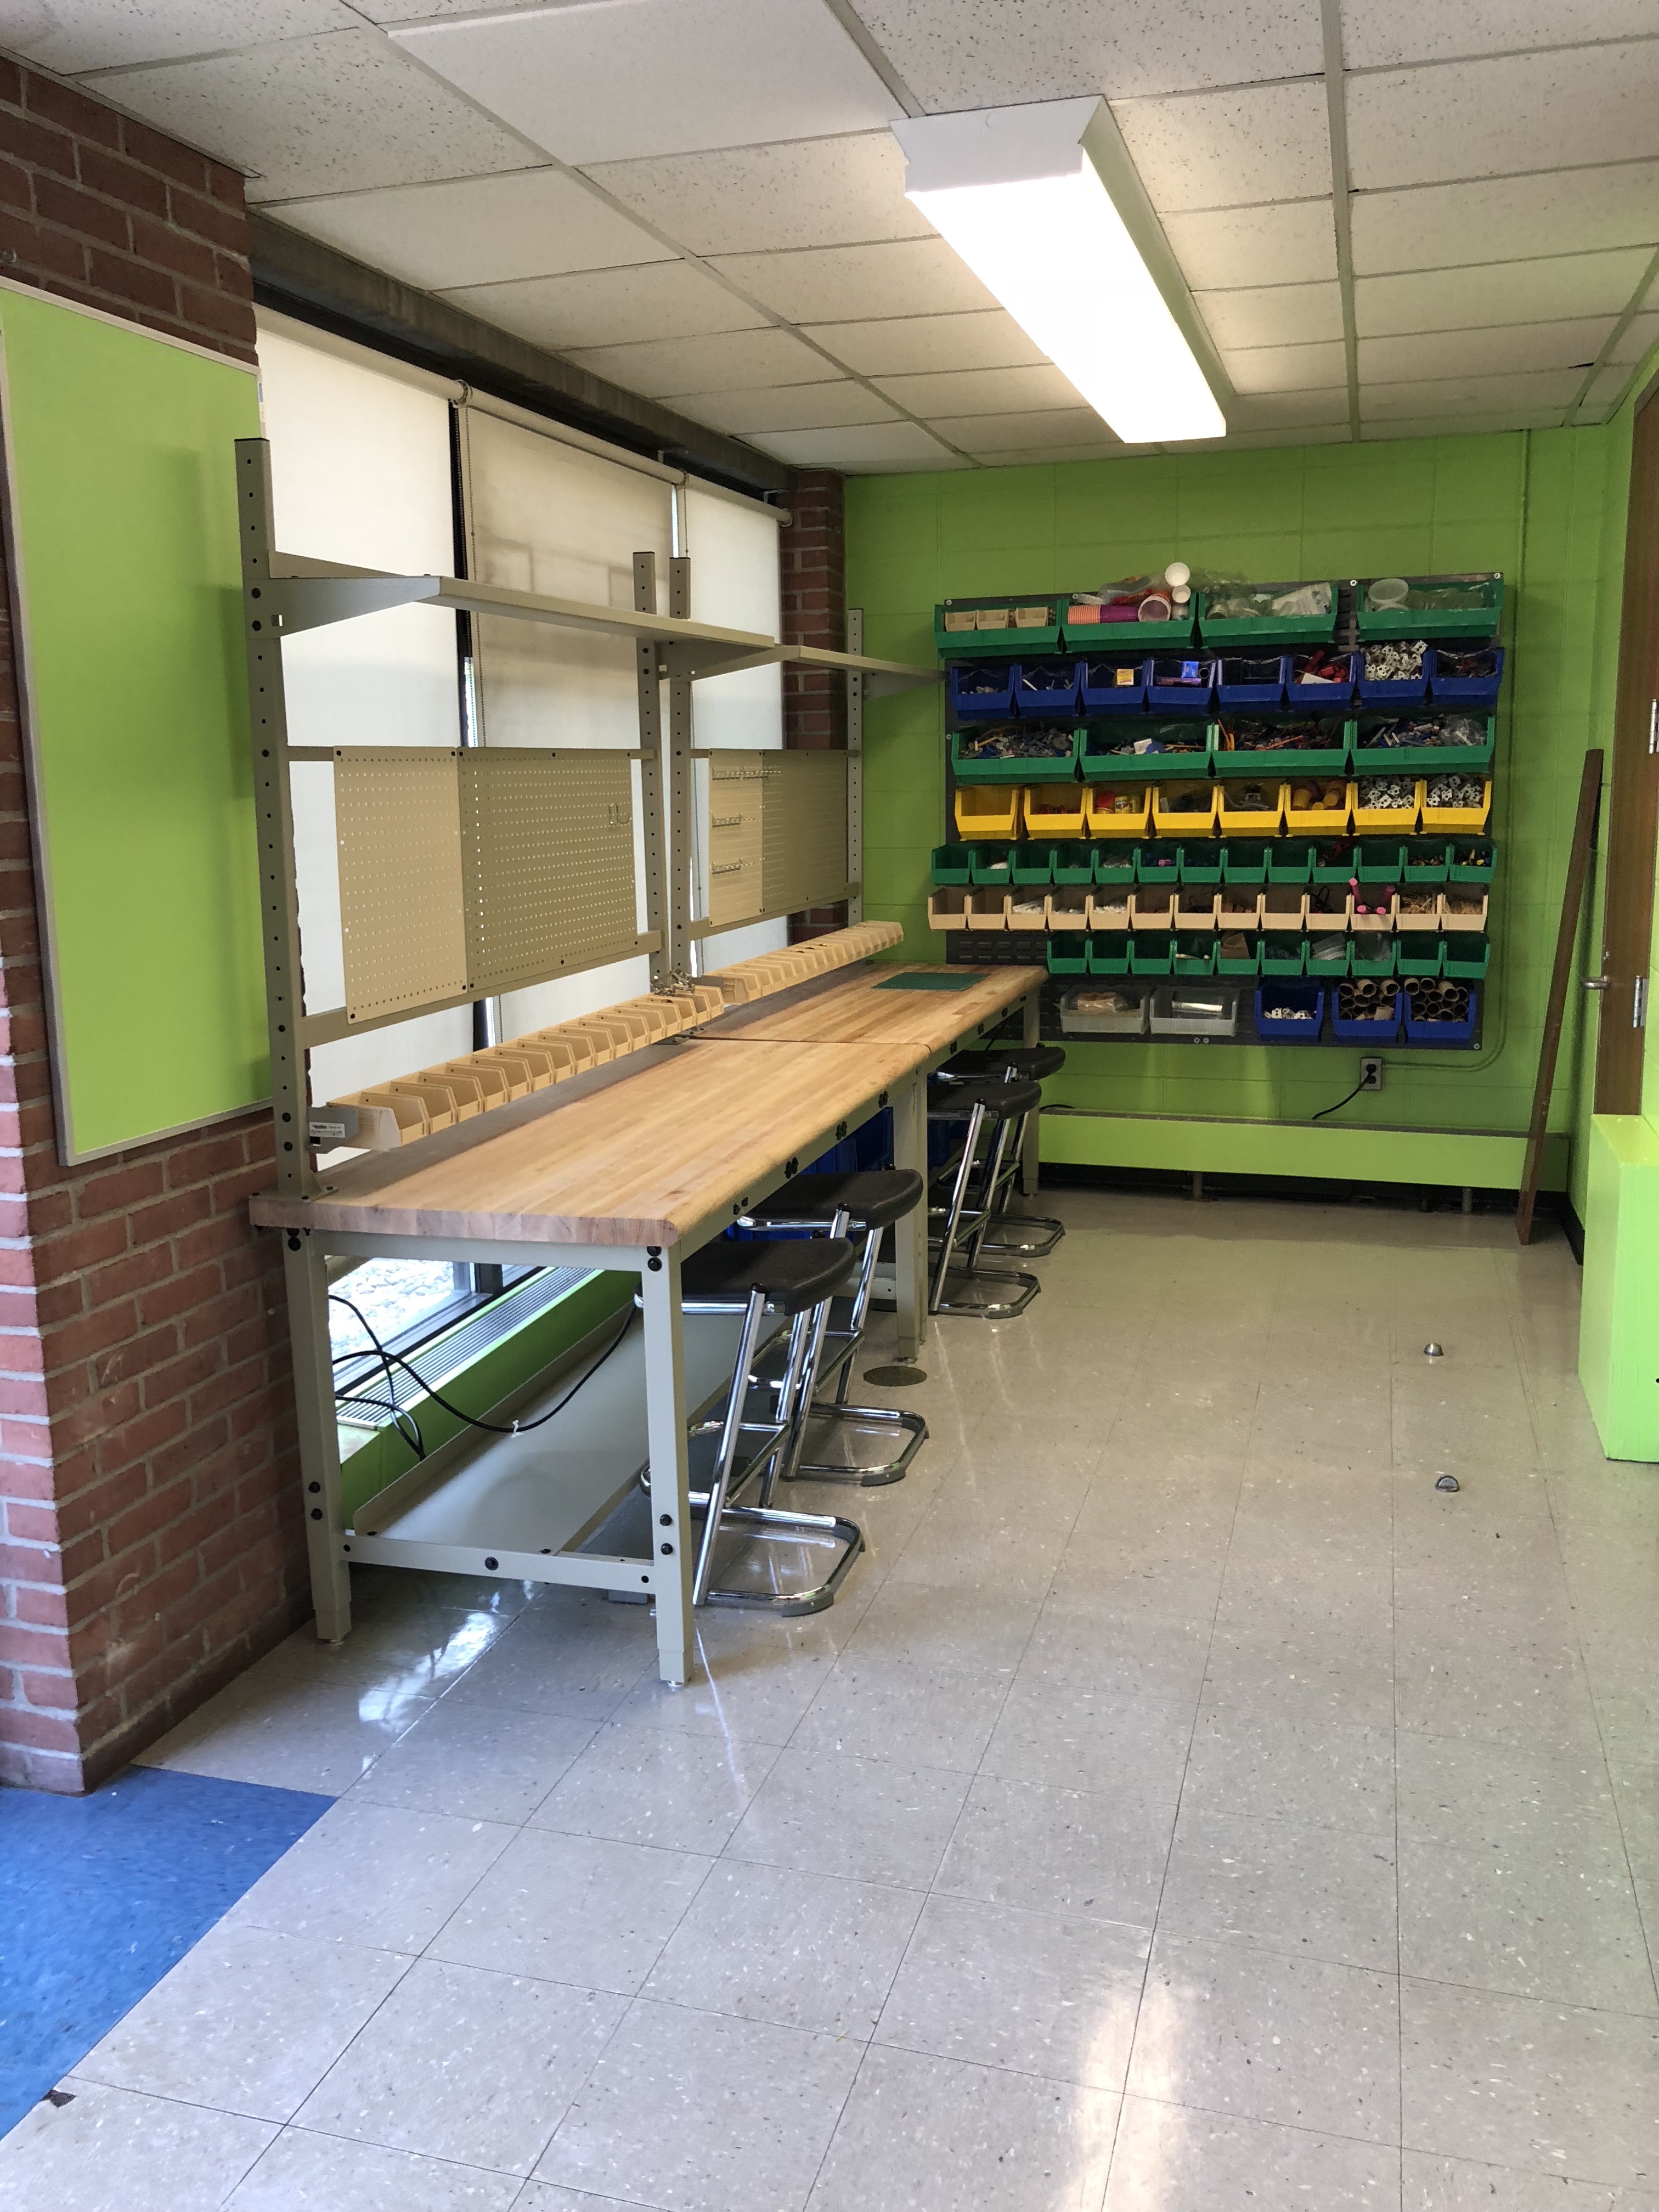 Science Lab MakerSpace area